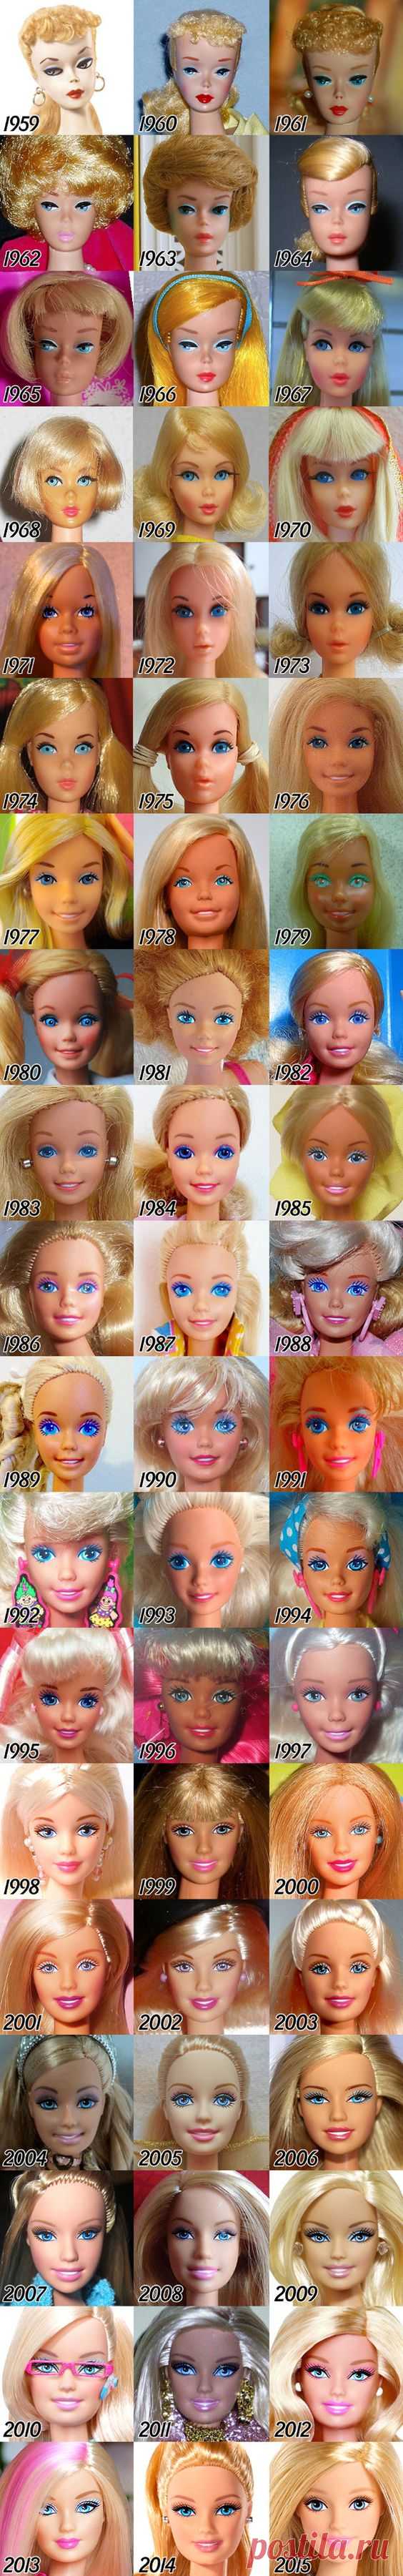 55 Years Old and Still Looking Good: How Barbie Has Changed Throughout the Years